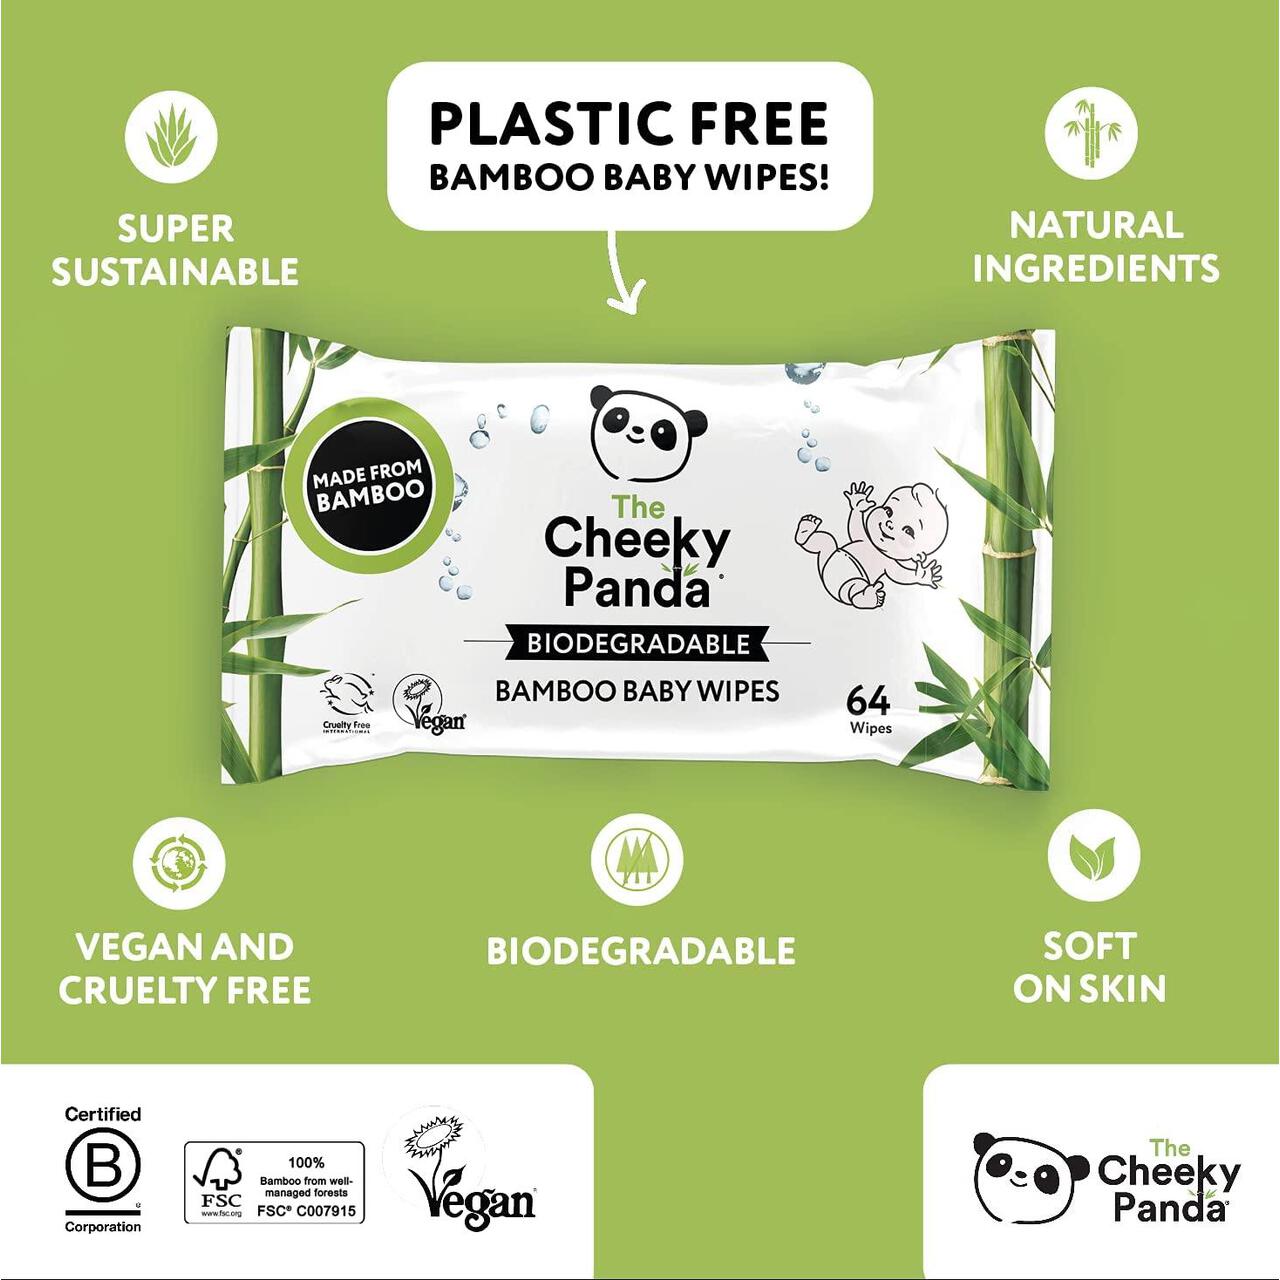 The Cheeky Panda Biodegradable Bamboo Baby Wipes 64 per pack